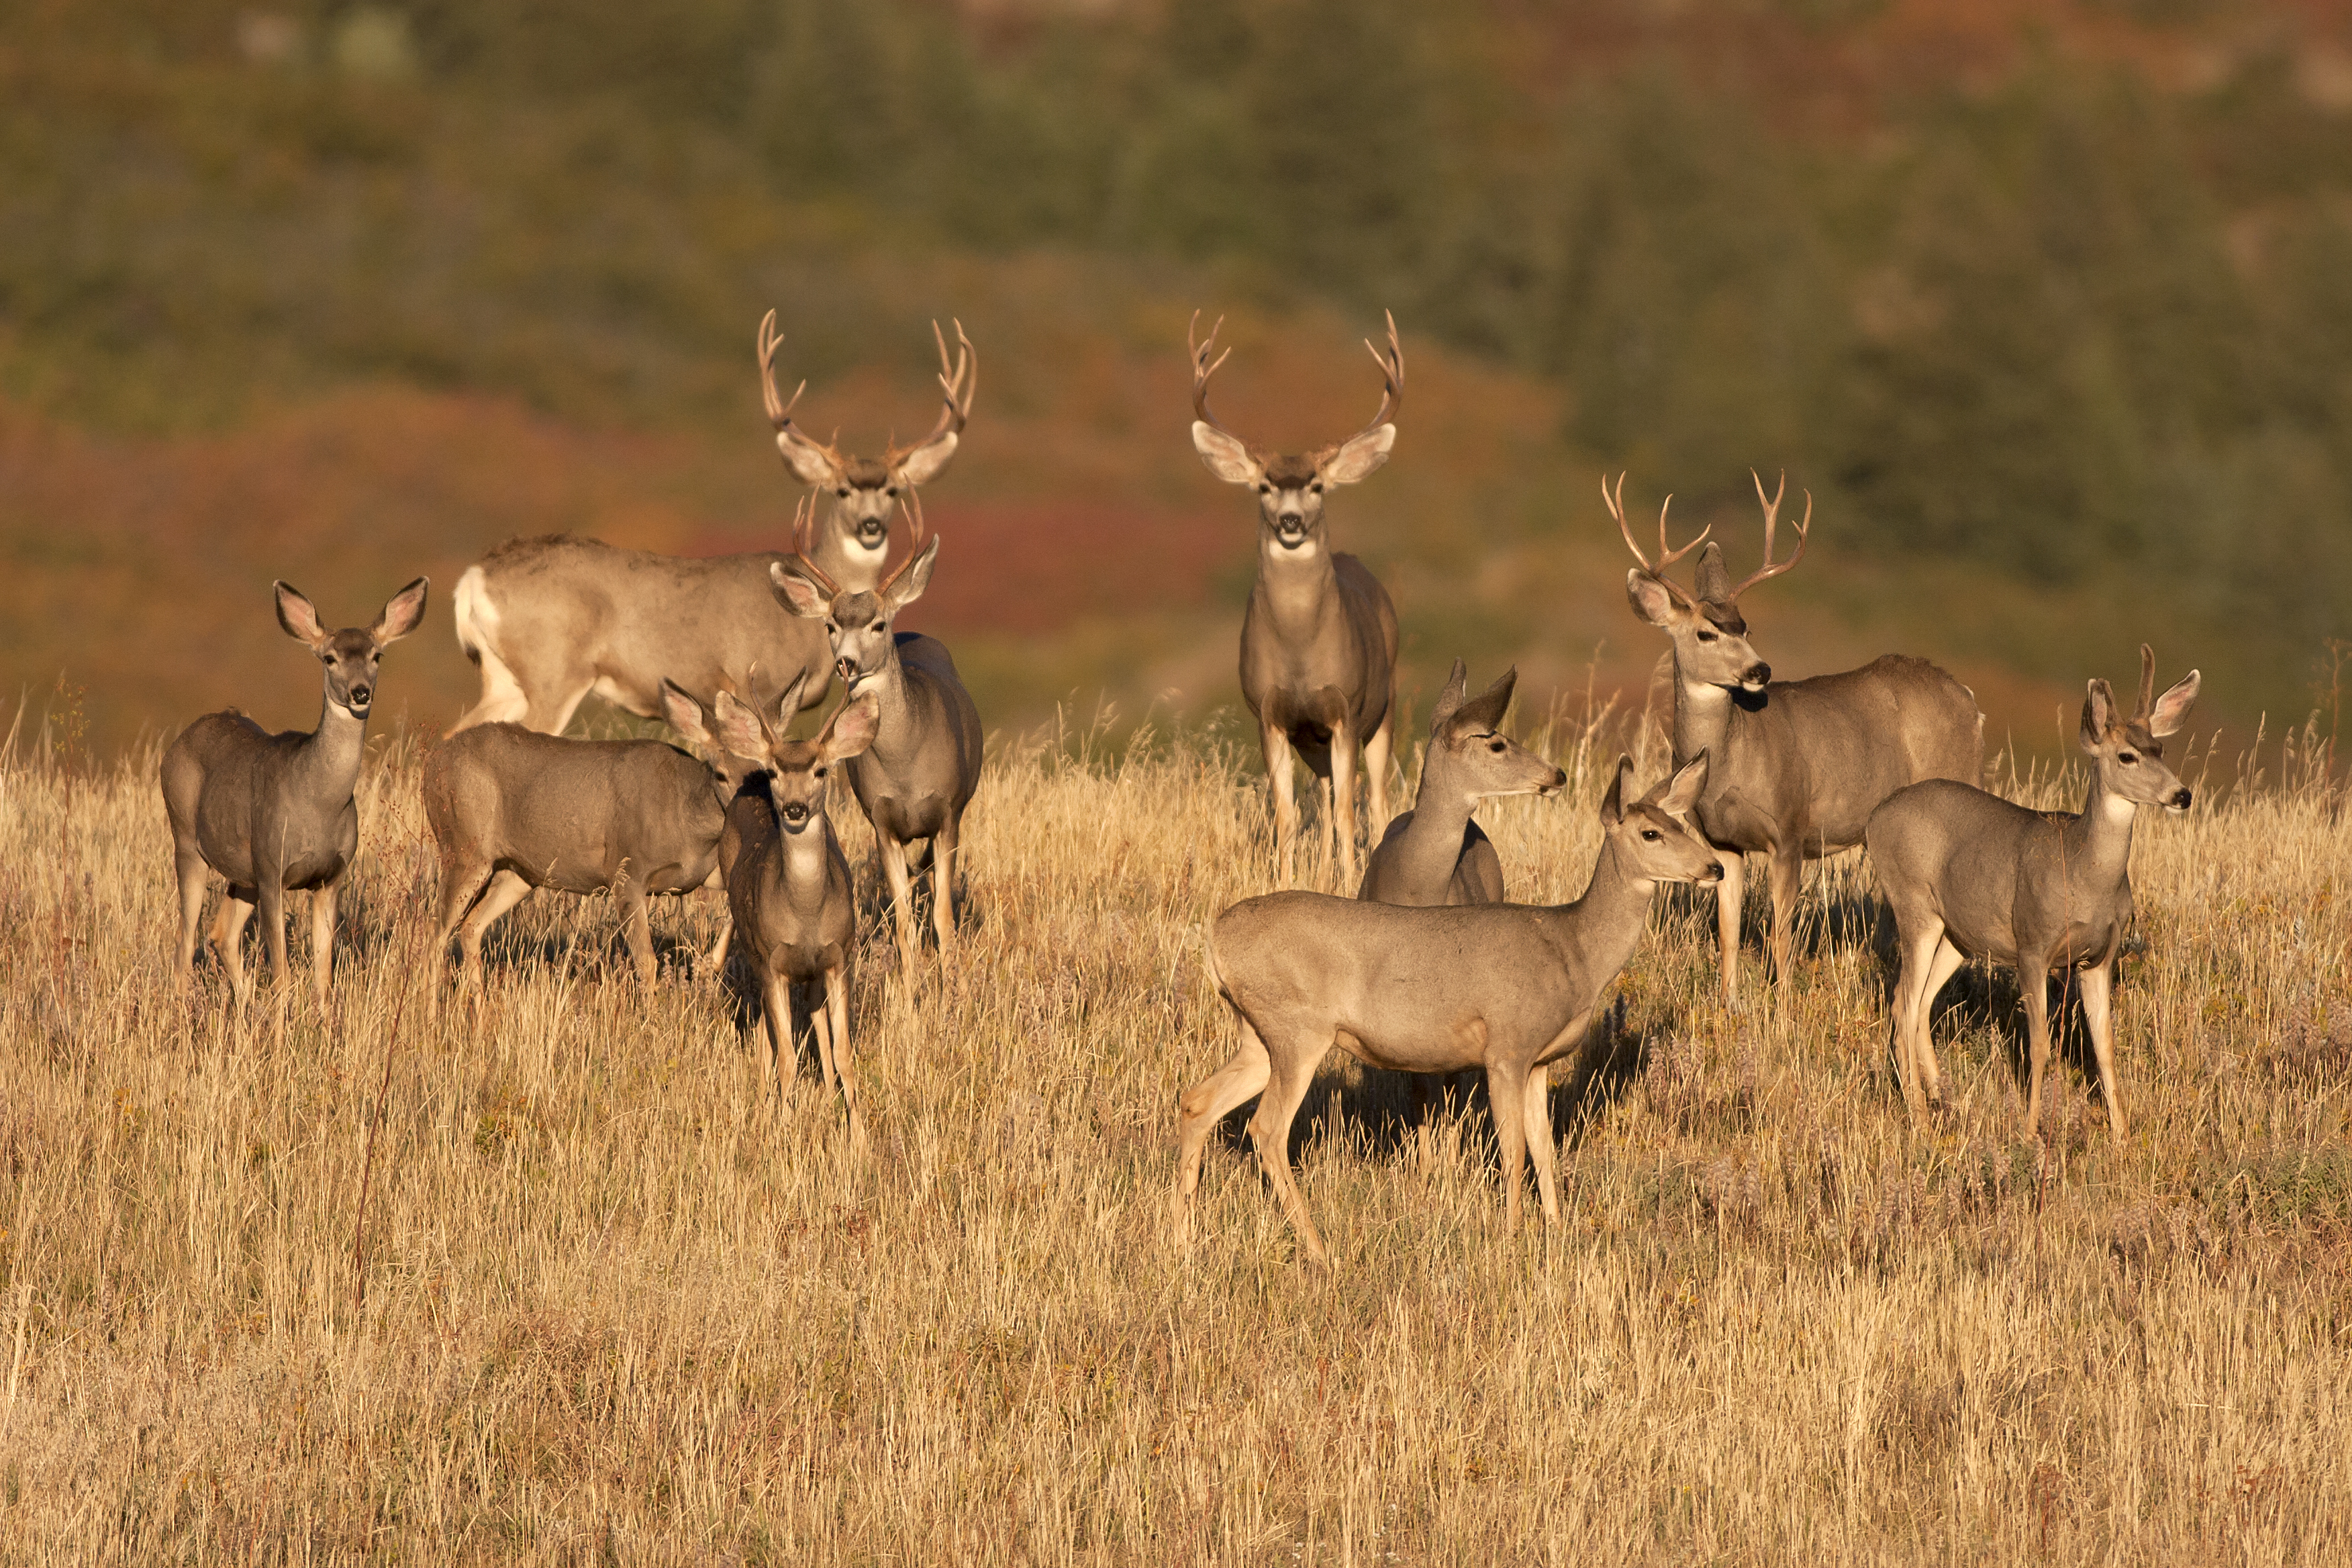 At sunrise a mule deer herd with large antlered males and females graze in tall prairie grass in Roxborough State Park, Colorado.